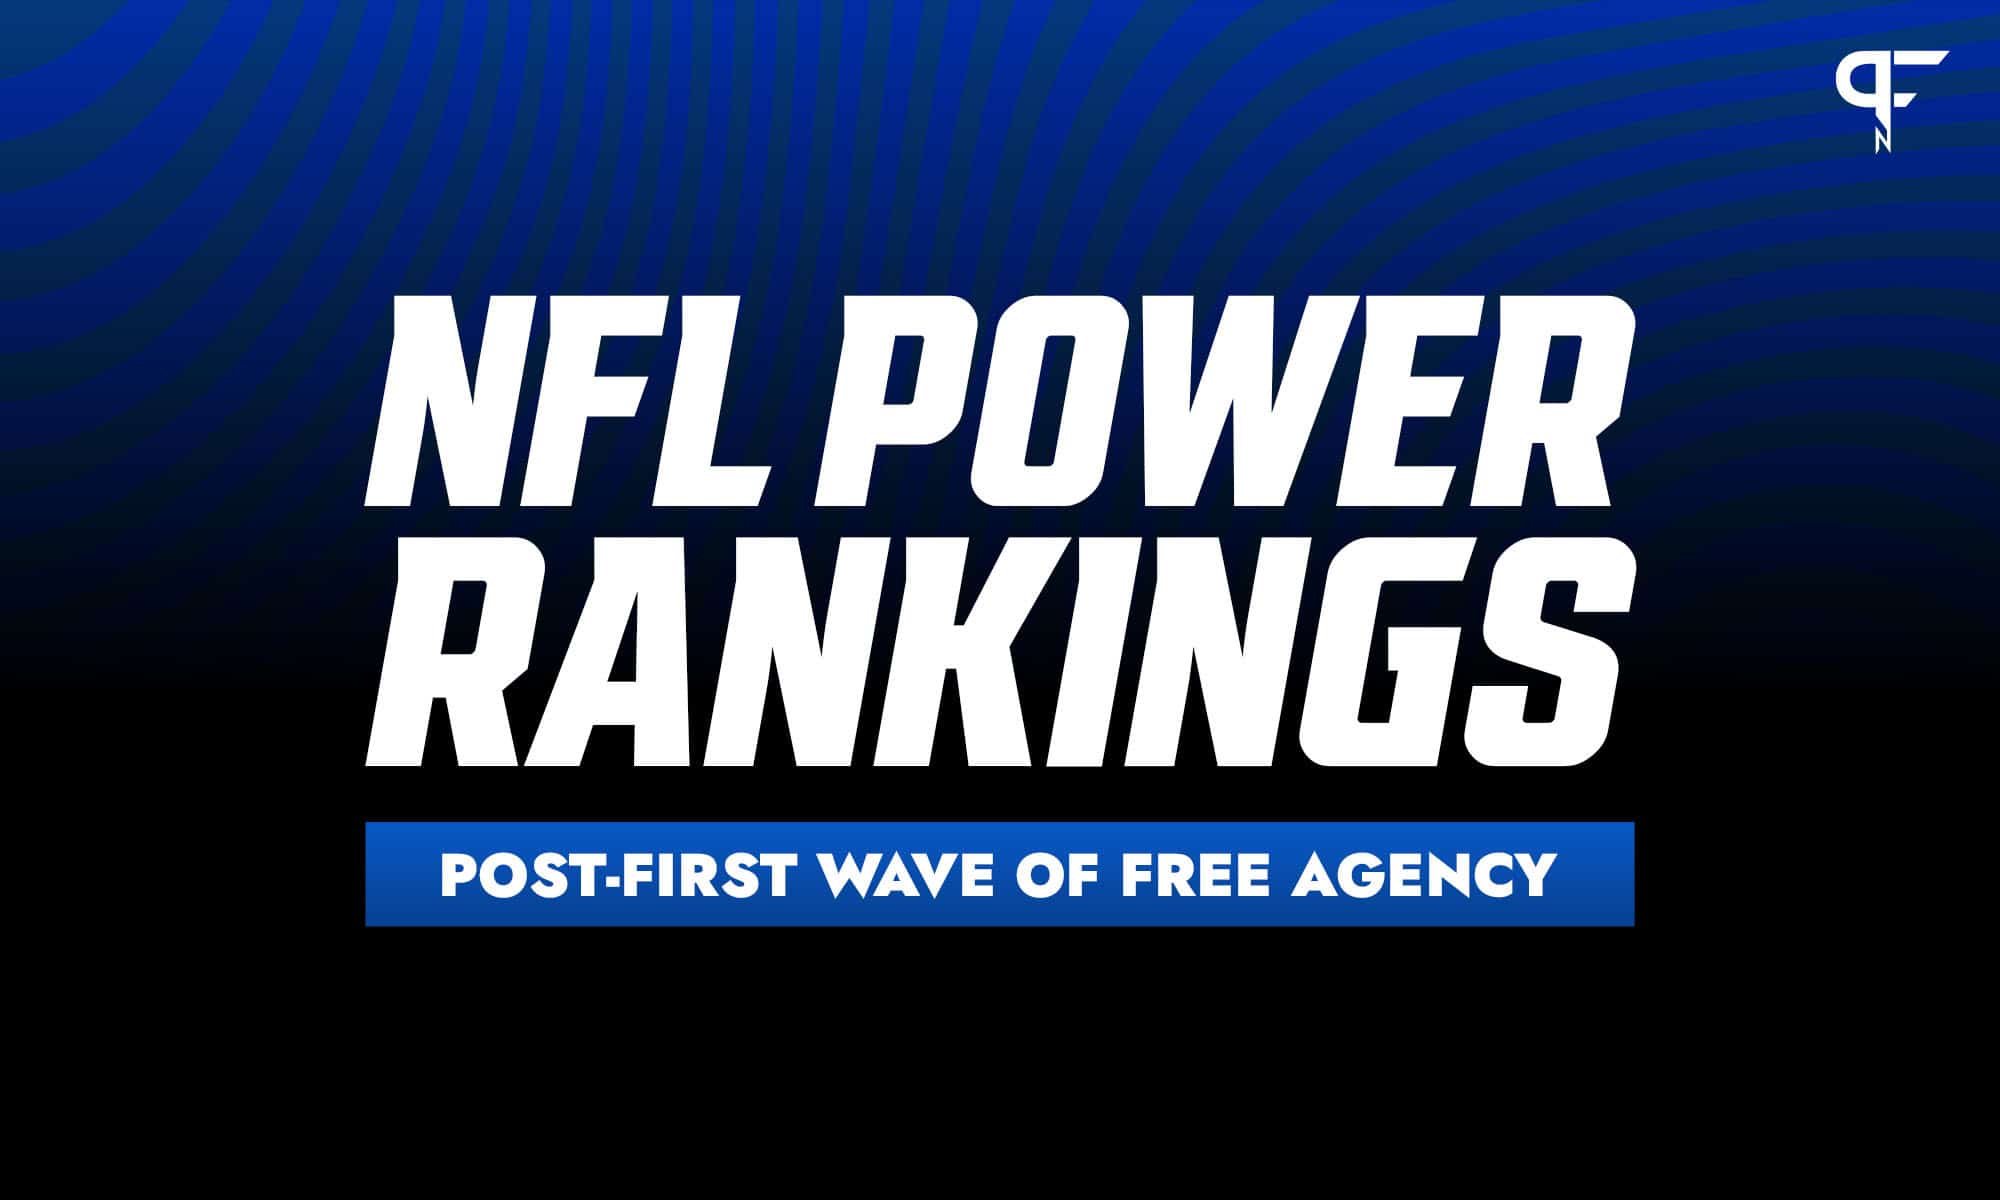 NFL Power Rankings Post-First Wave of Free Agency: What 'big